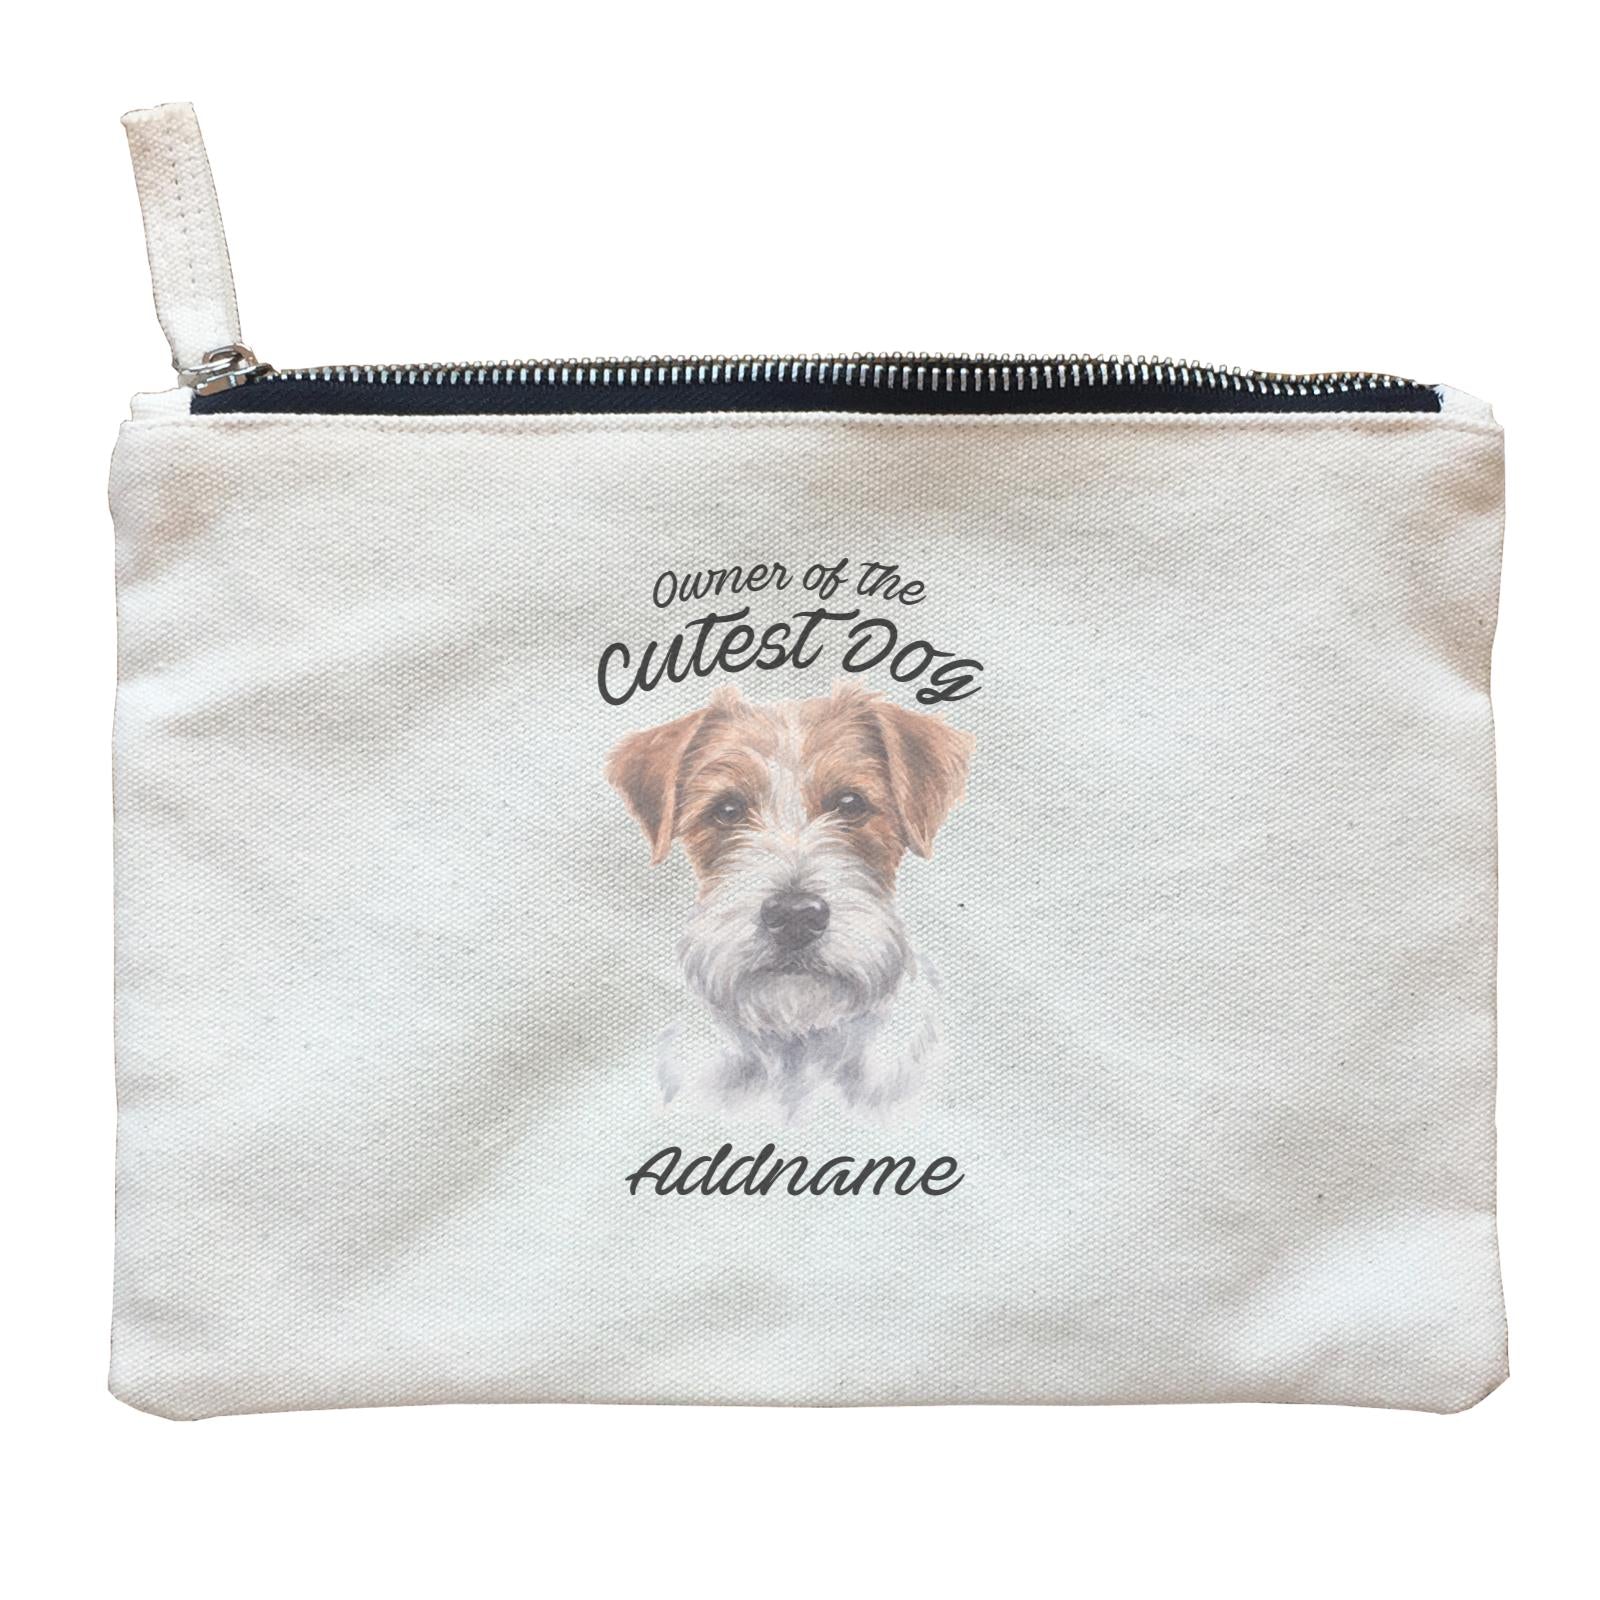 Watercolor Dog Owner Of The Cutest Dog Jack Russell Long Hair Addname Zipper Pouch